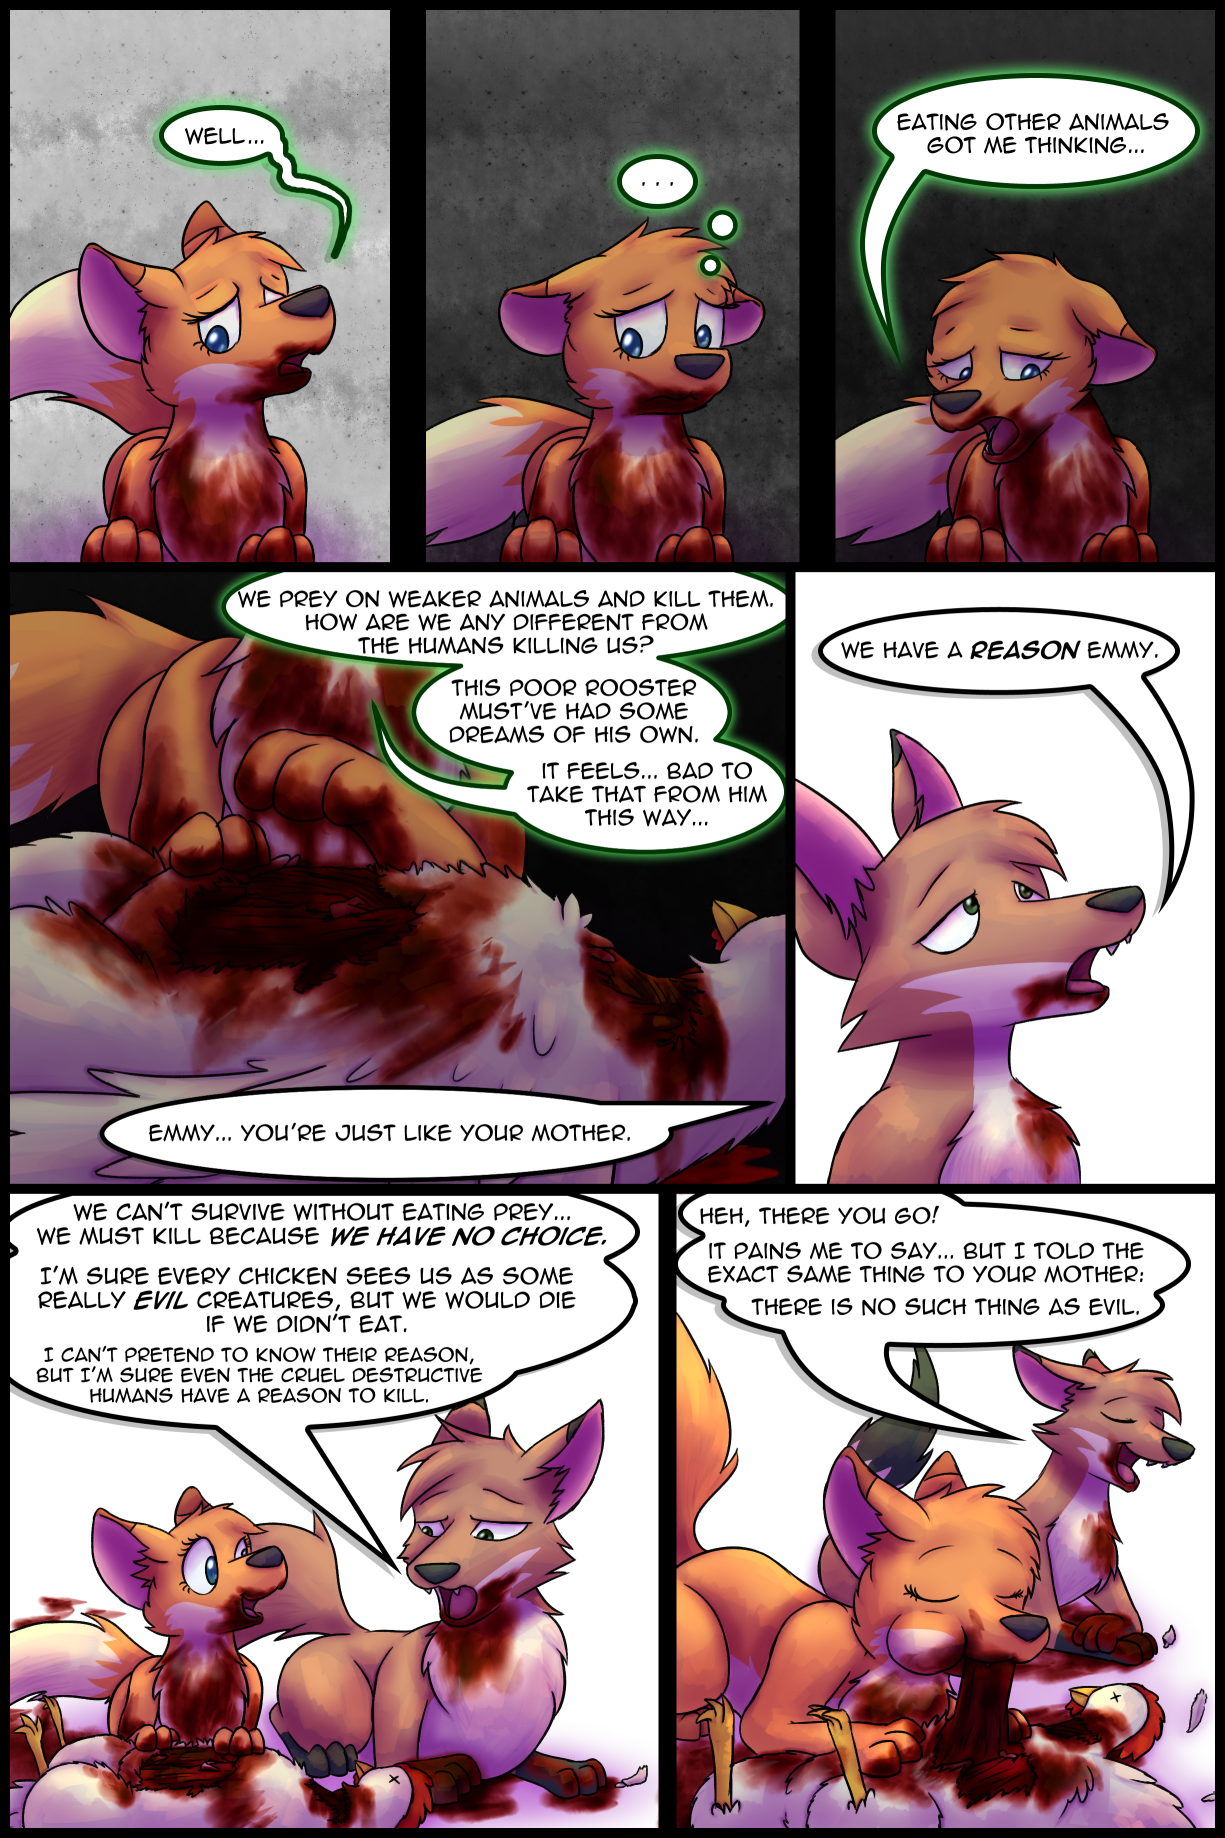 Ch3 Page 39 – Our Reasons